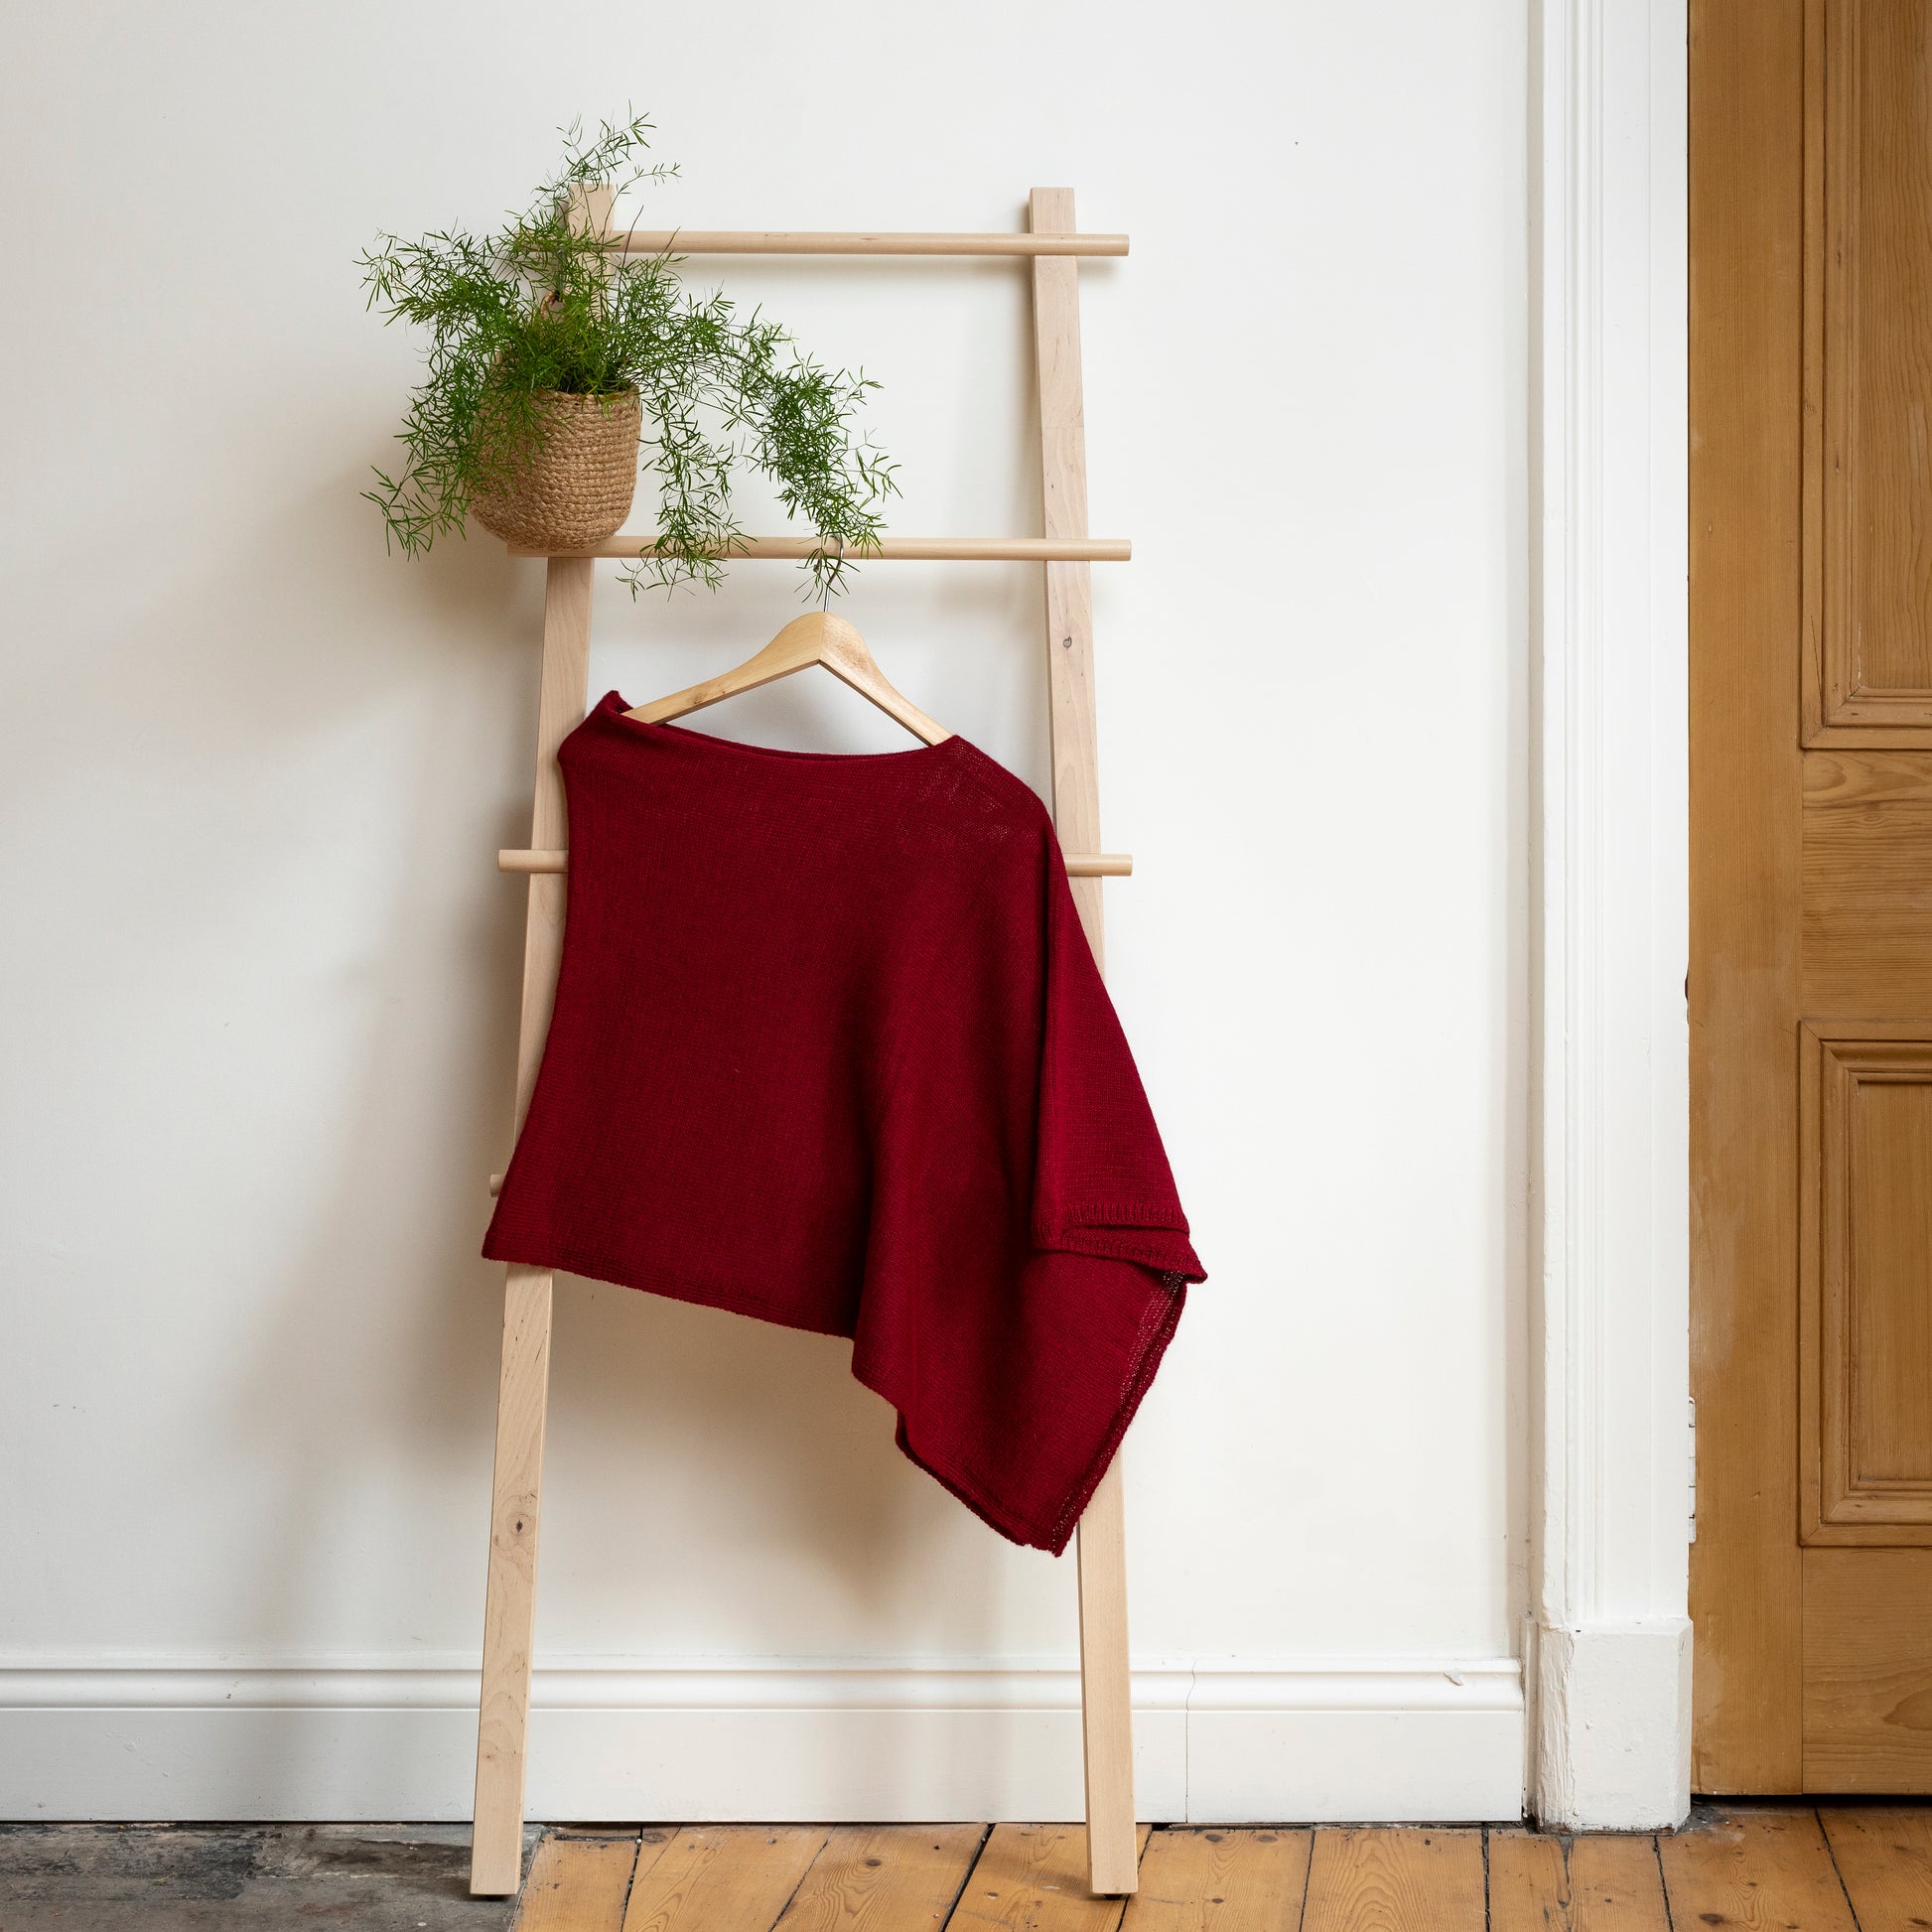 Asymmetrical burgundy luxury knitted poncho hanging on wooden ladder.